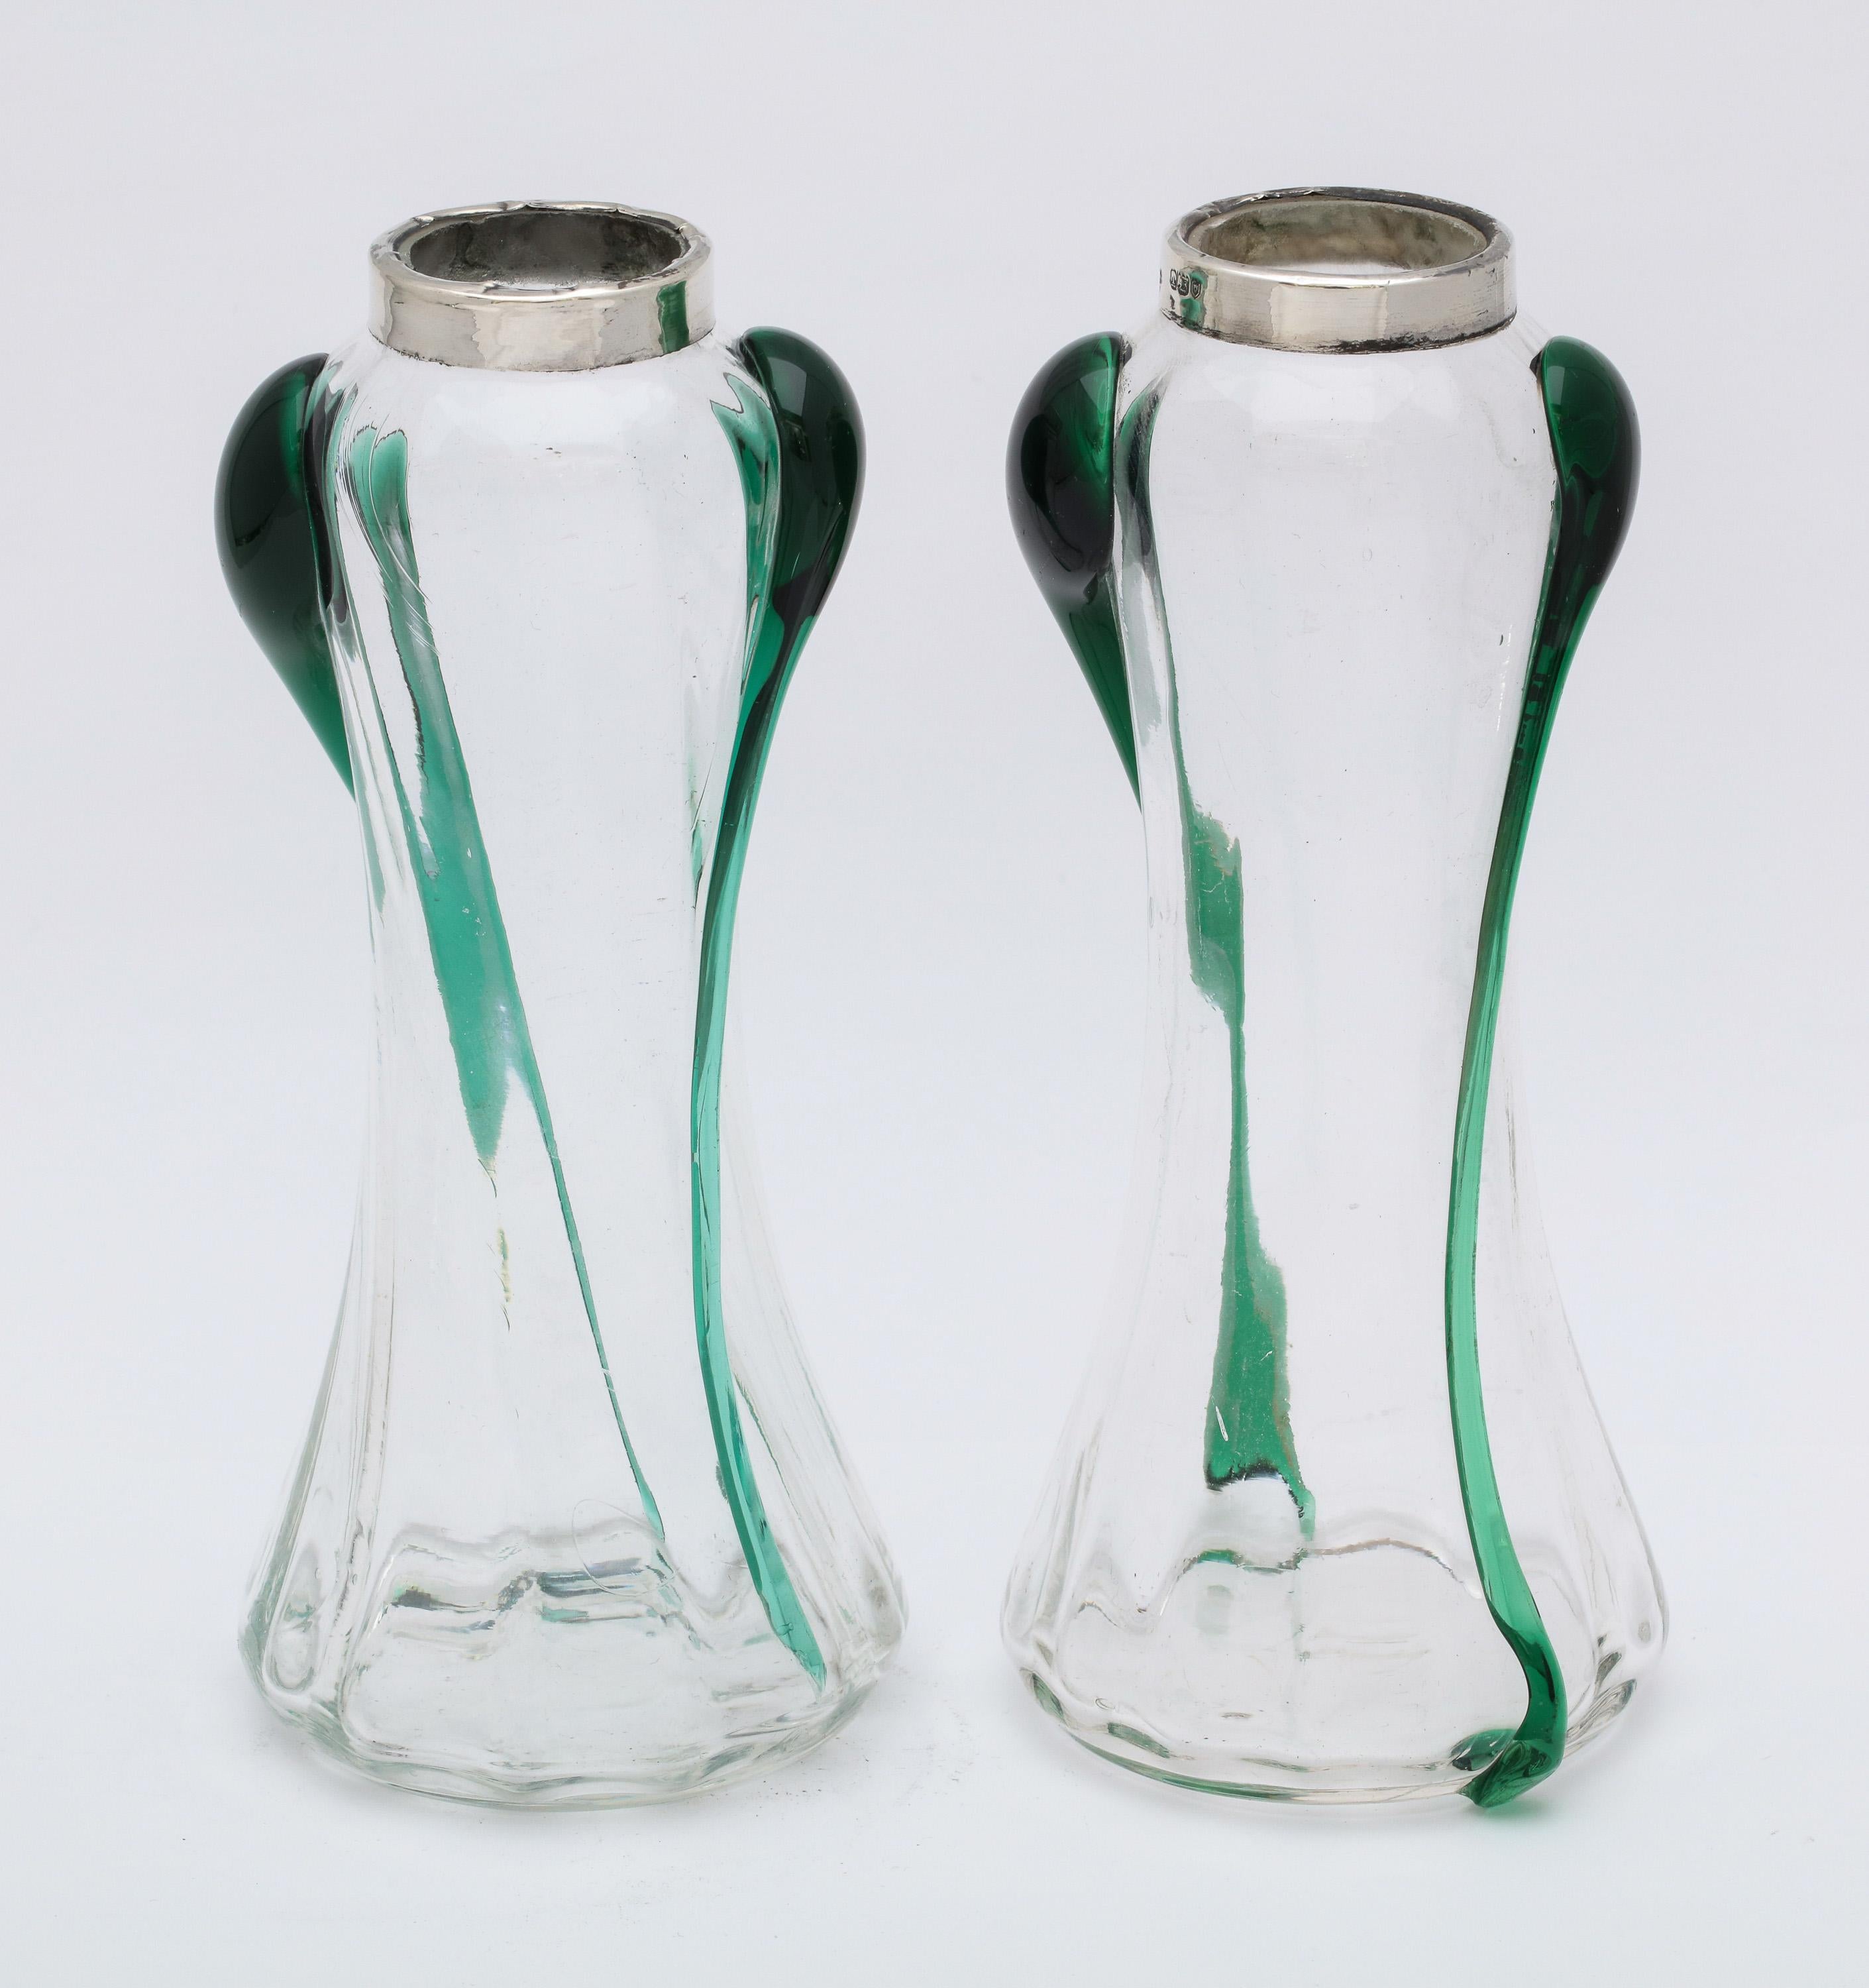 Pair of unusual, Art Nouveau, sterling silver-mounted hand blown dark green and clear glass bud vases, London, 1904, A. Bromet and Co. - makers. Each vase stands 6 1/2 inches high x 2 3/4 inches diameter (at widest point) x 1 1/2 inches diameter